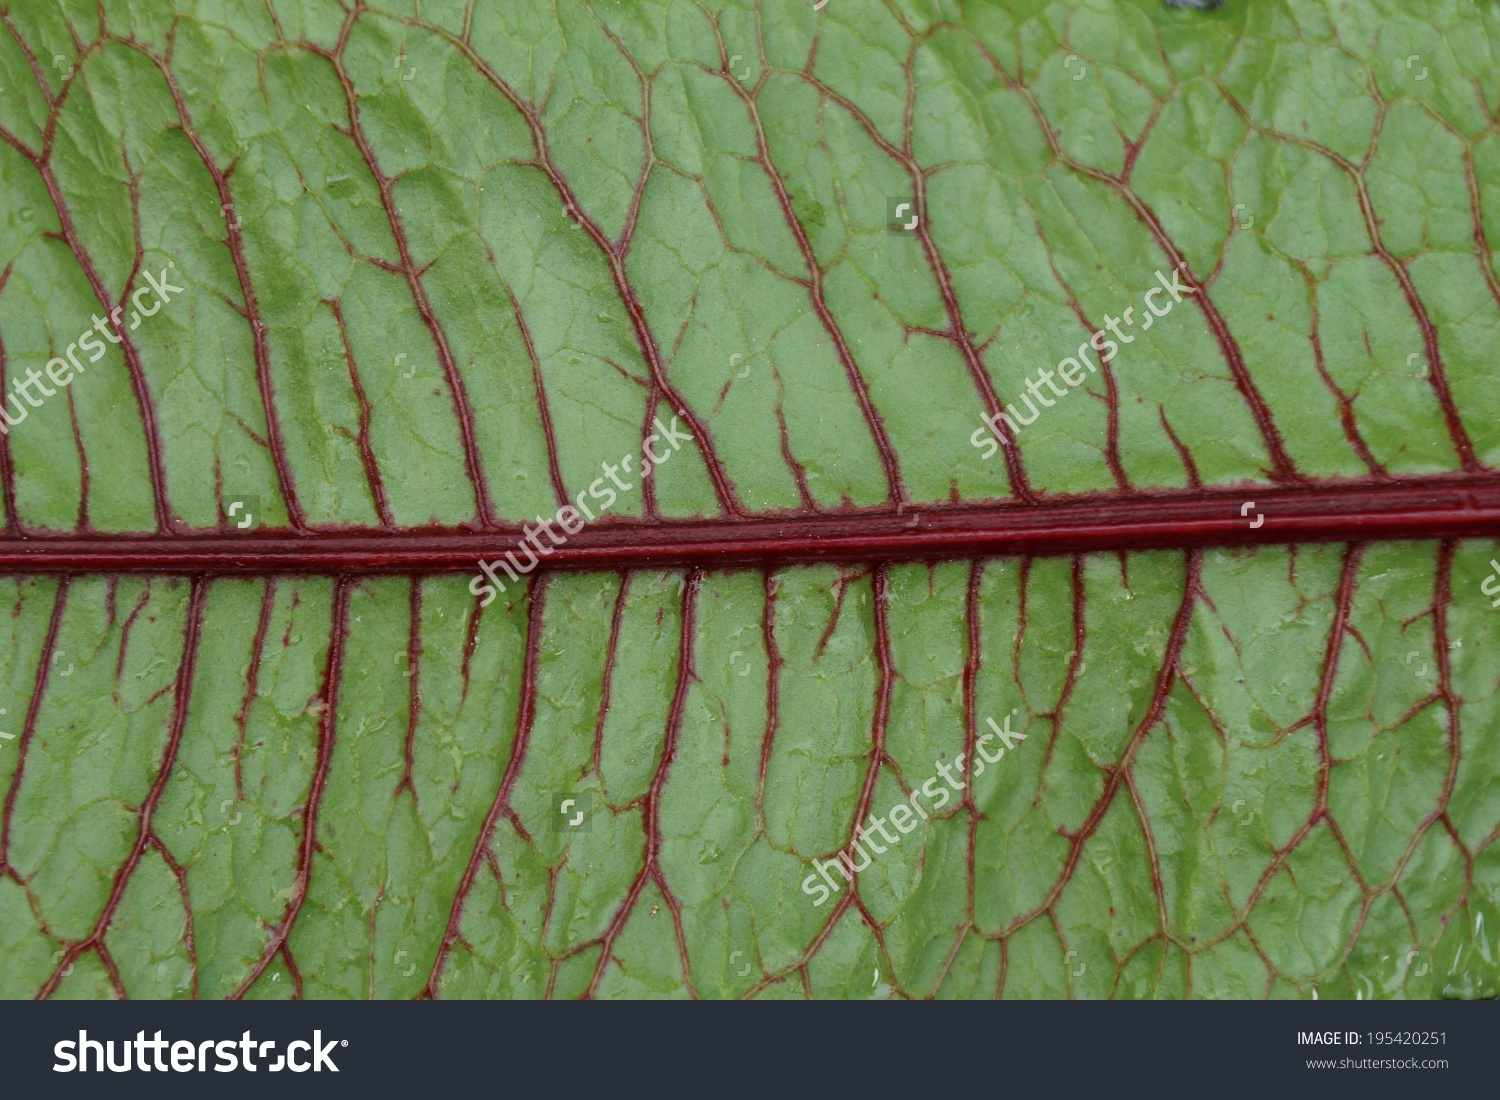 Green Leaves With Dark Red Veins Of The Blood Dock Red Sorrel.